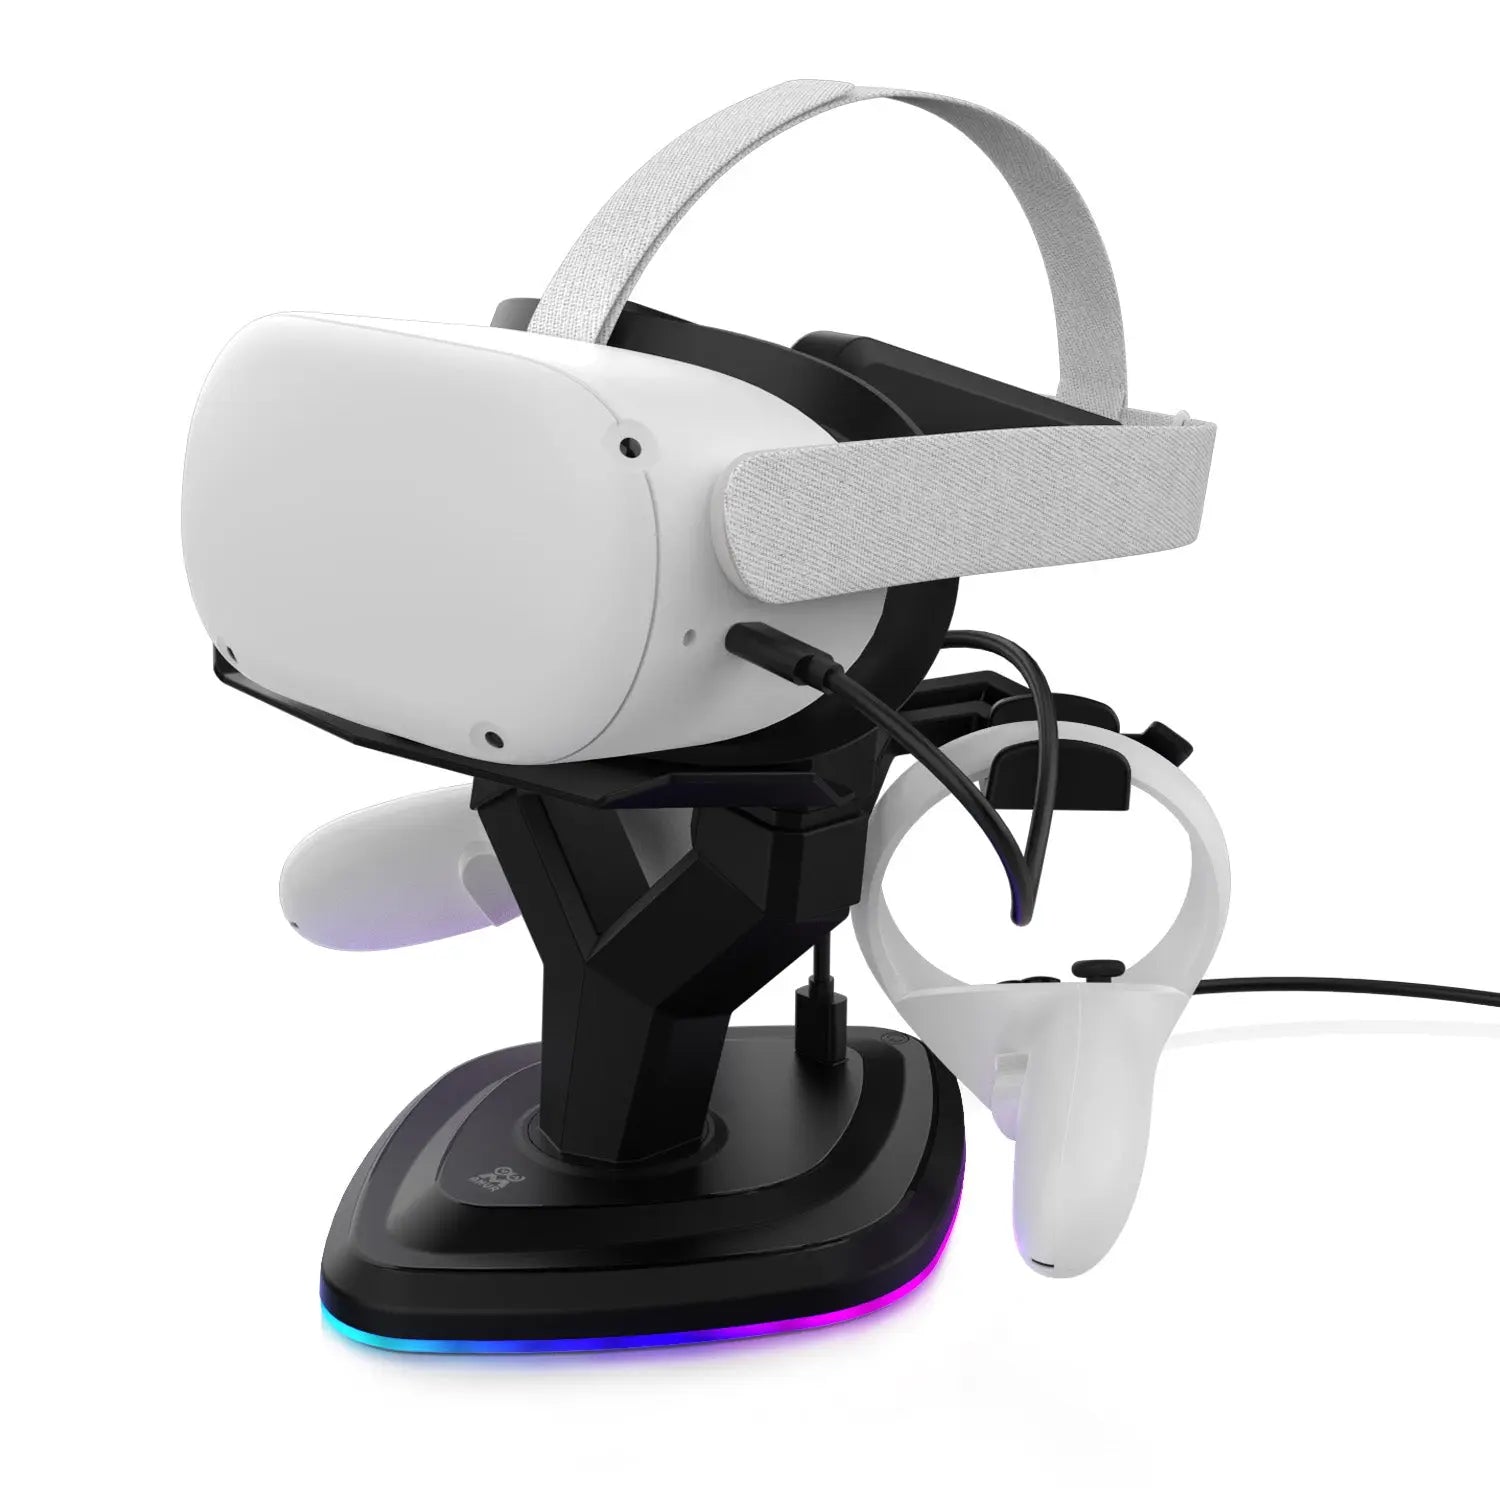 BoboVr M3 finaly available in Europe ! : r/OculusQuest